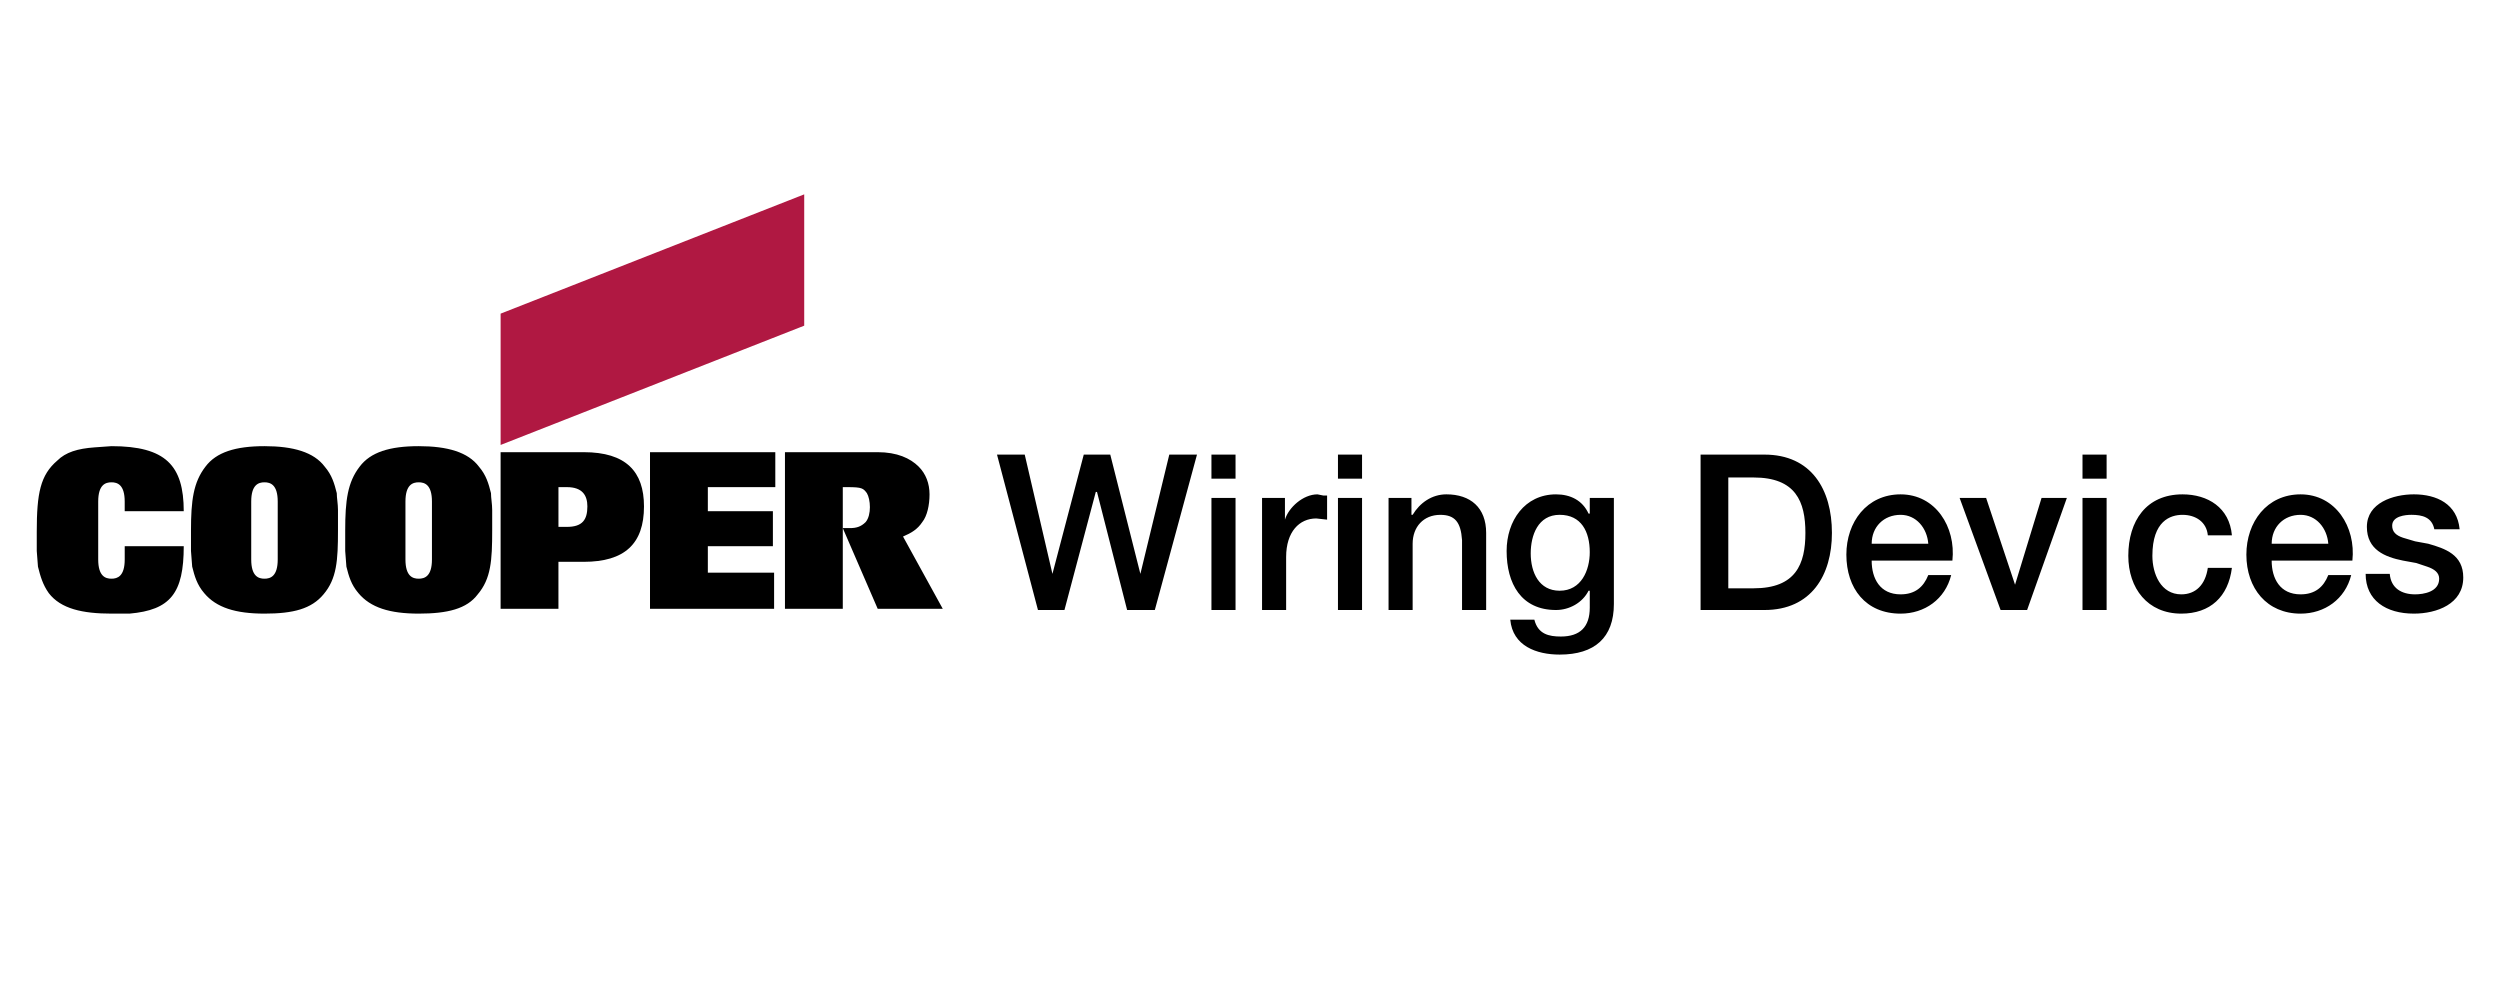 Cooper-Wiring-Devices